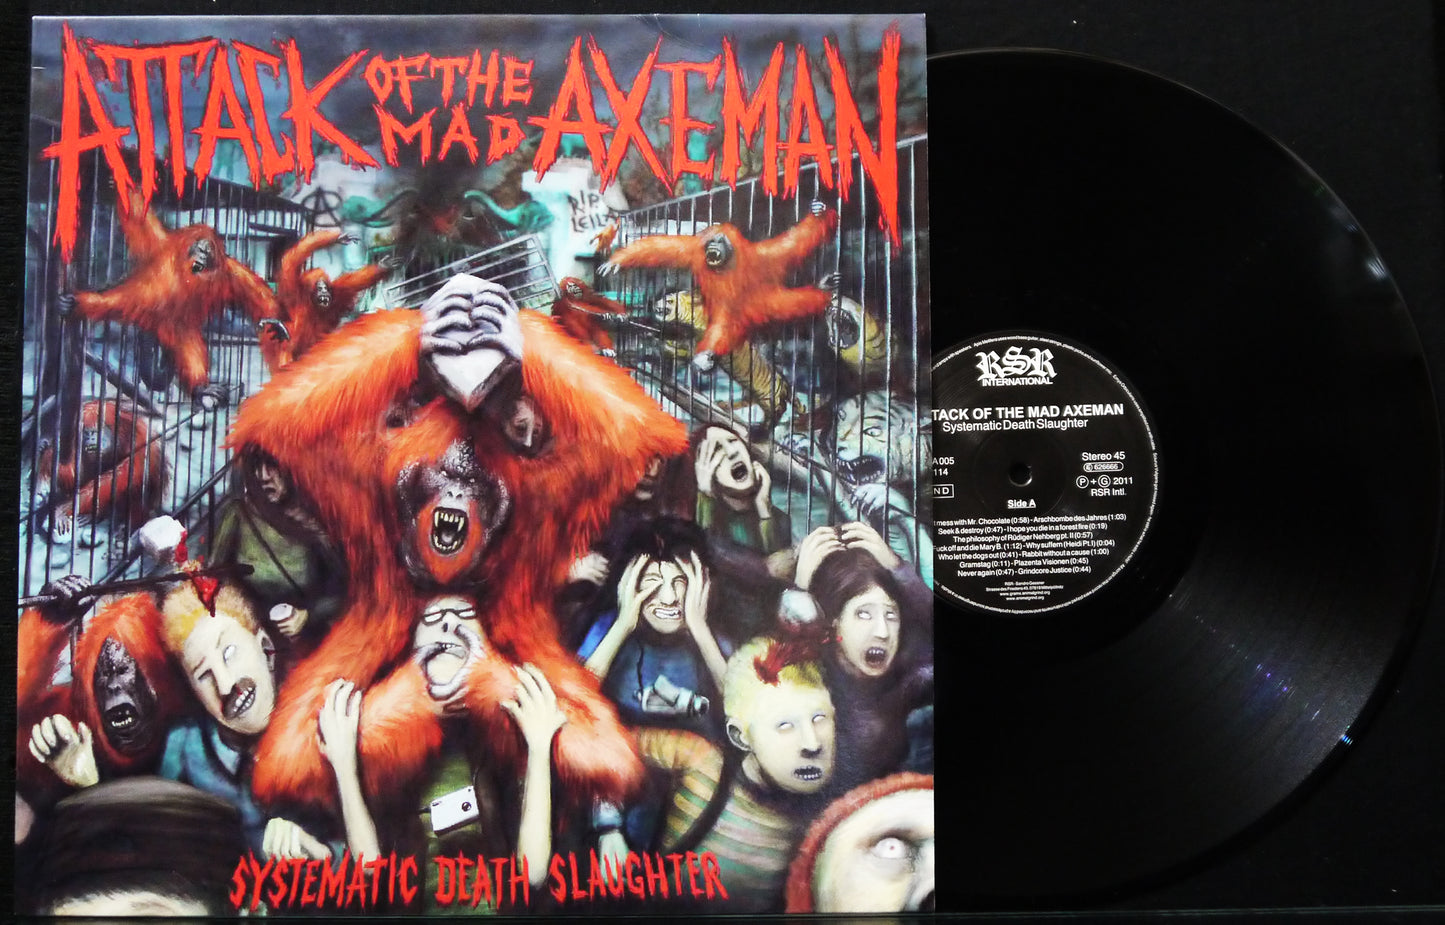 ATTACK OF THE MAD AXEMAN - Systematic Death Slaughter 12"